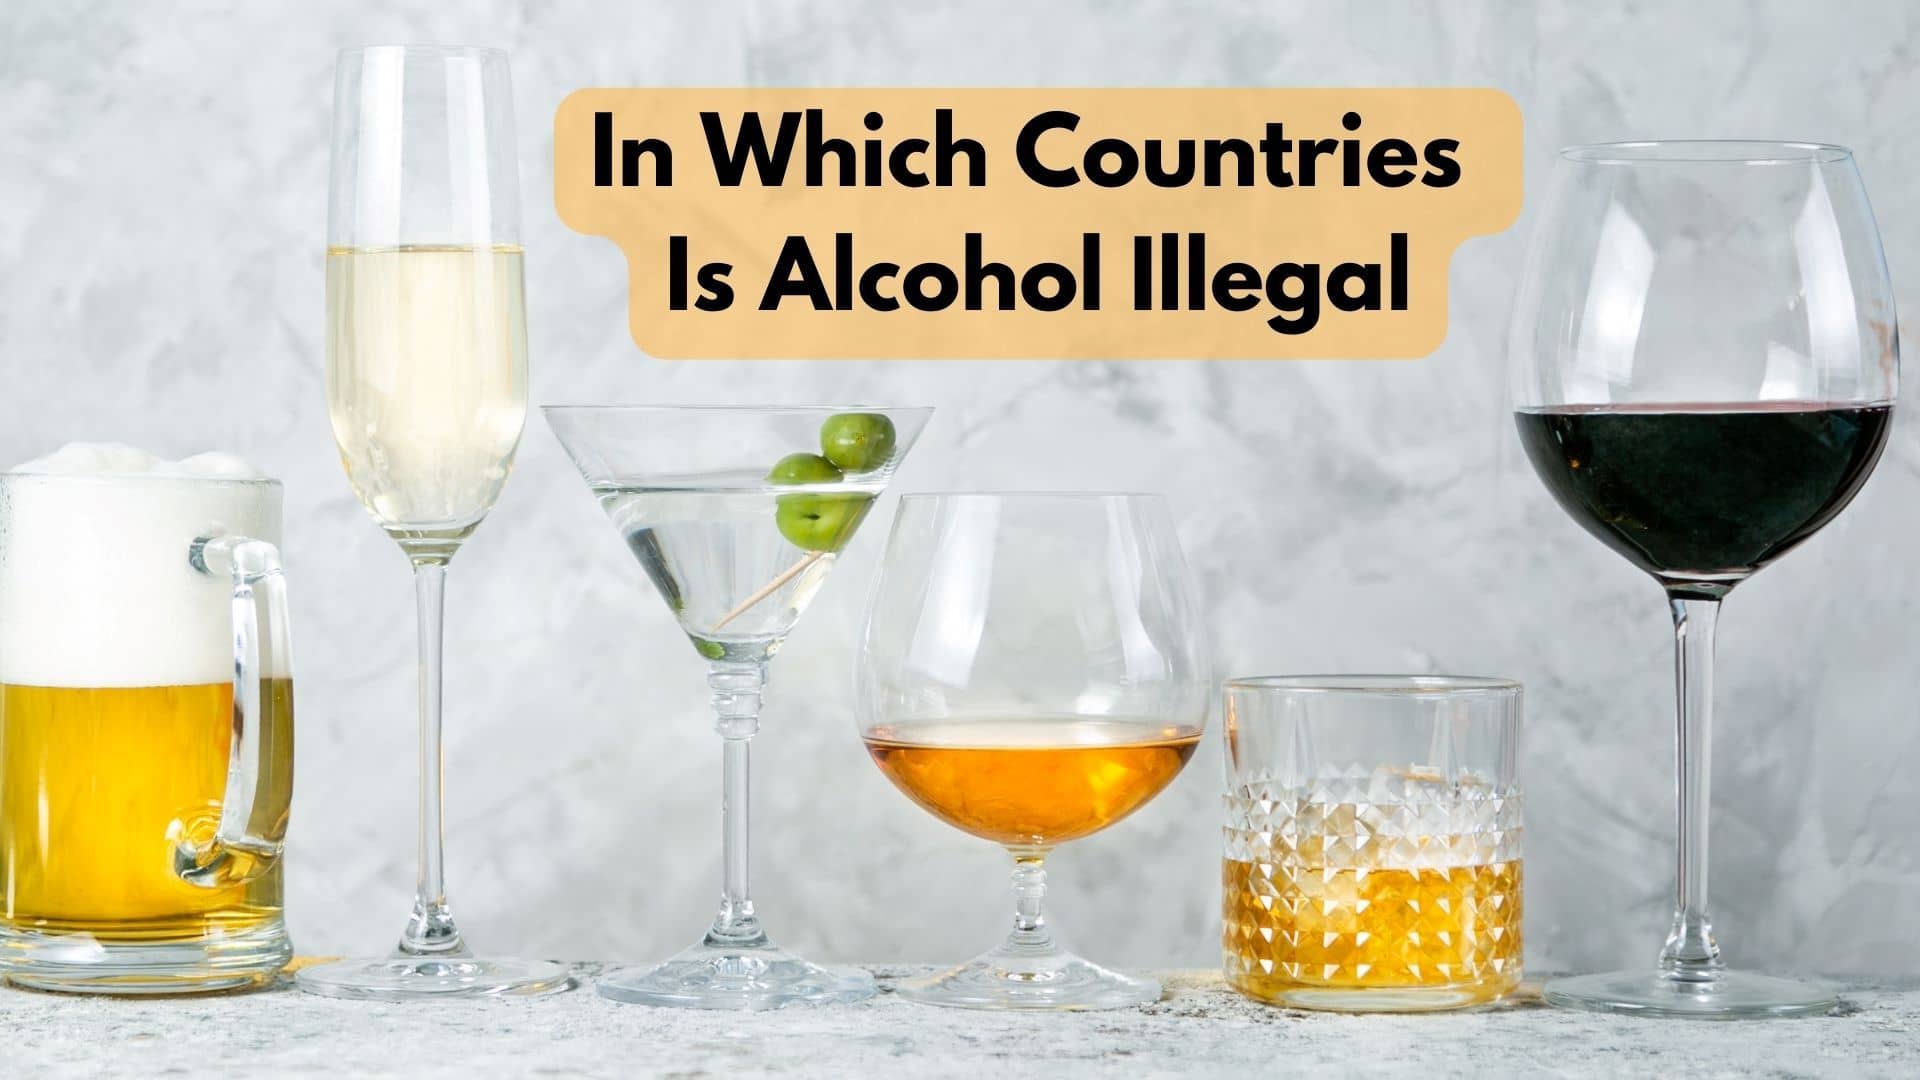 In Which Countries Is Alcohol Illegal?